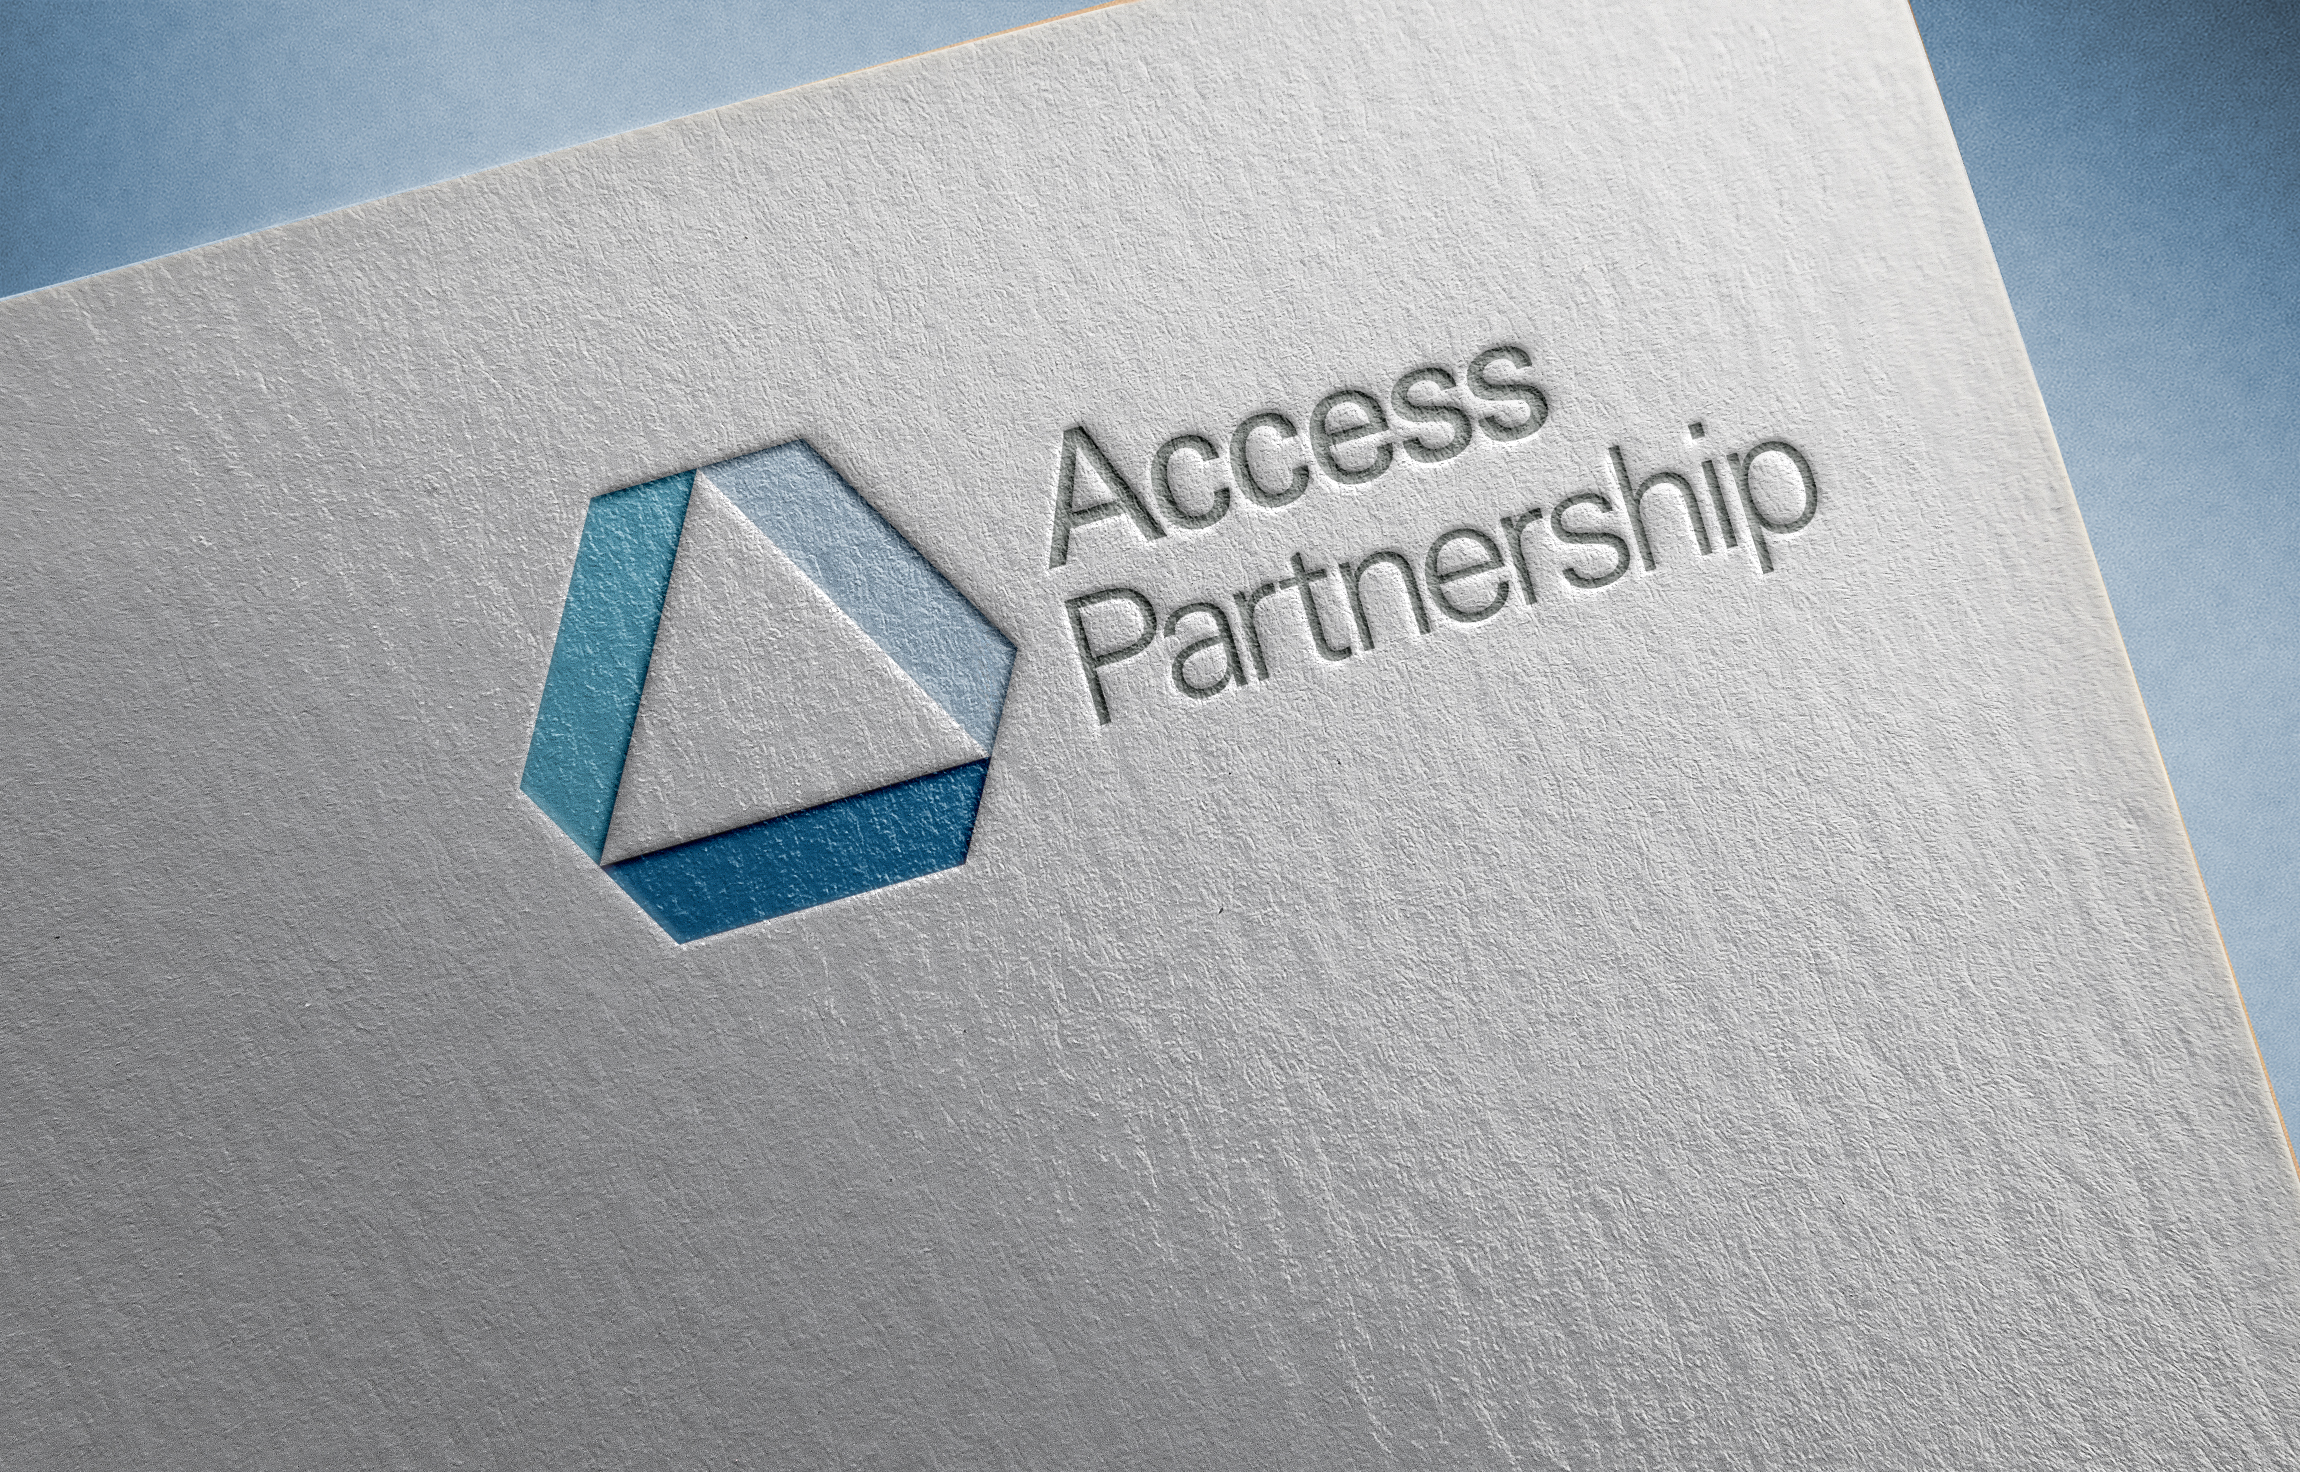 Access Partnership Announces the Launch of a New Advisory Board